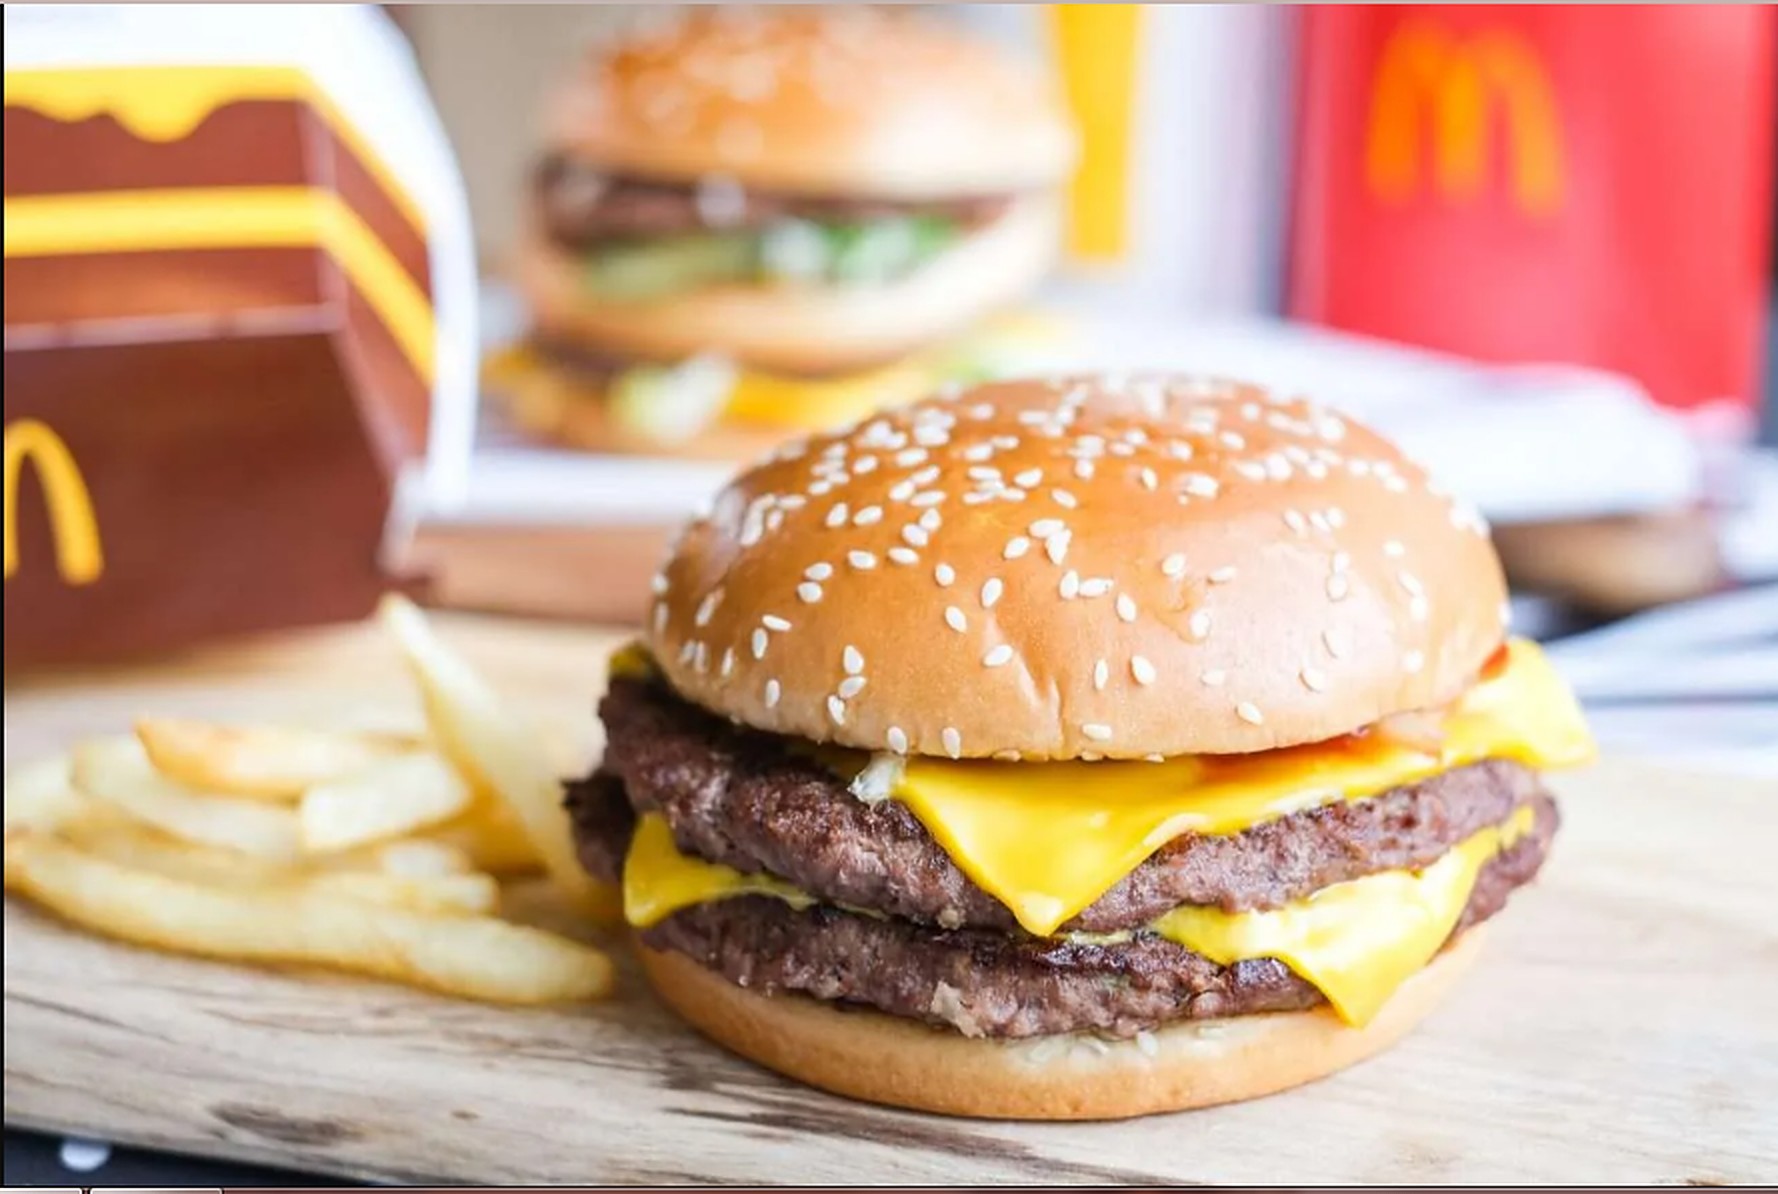 The Return of the Double Big Mac: A Delight or a Dilemma?